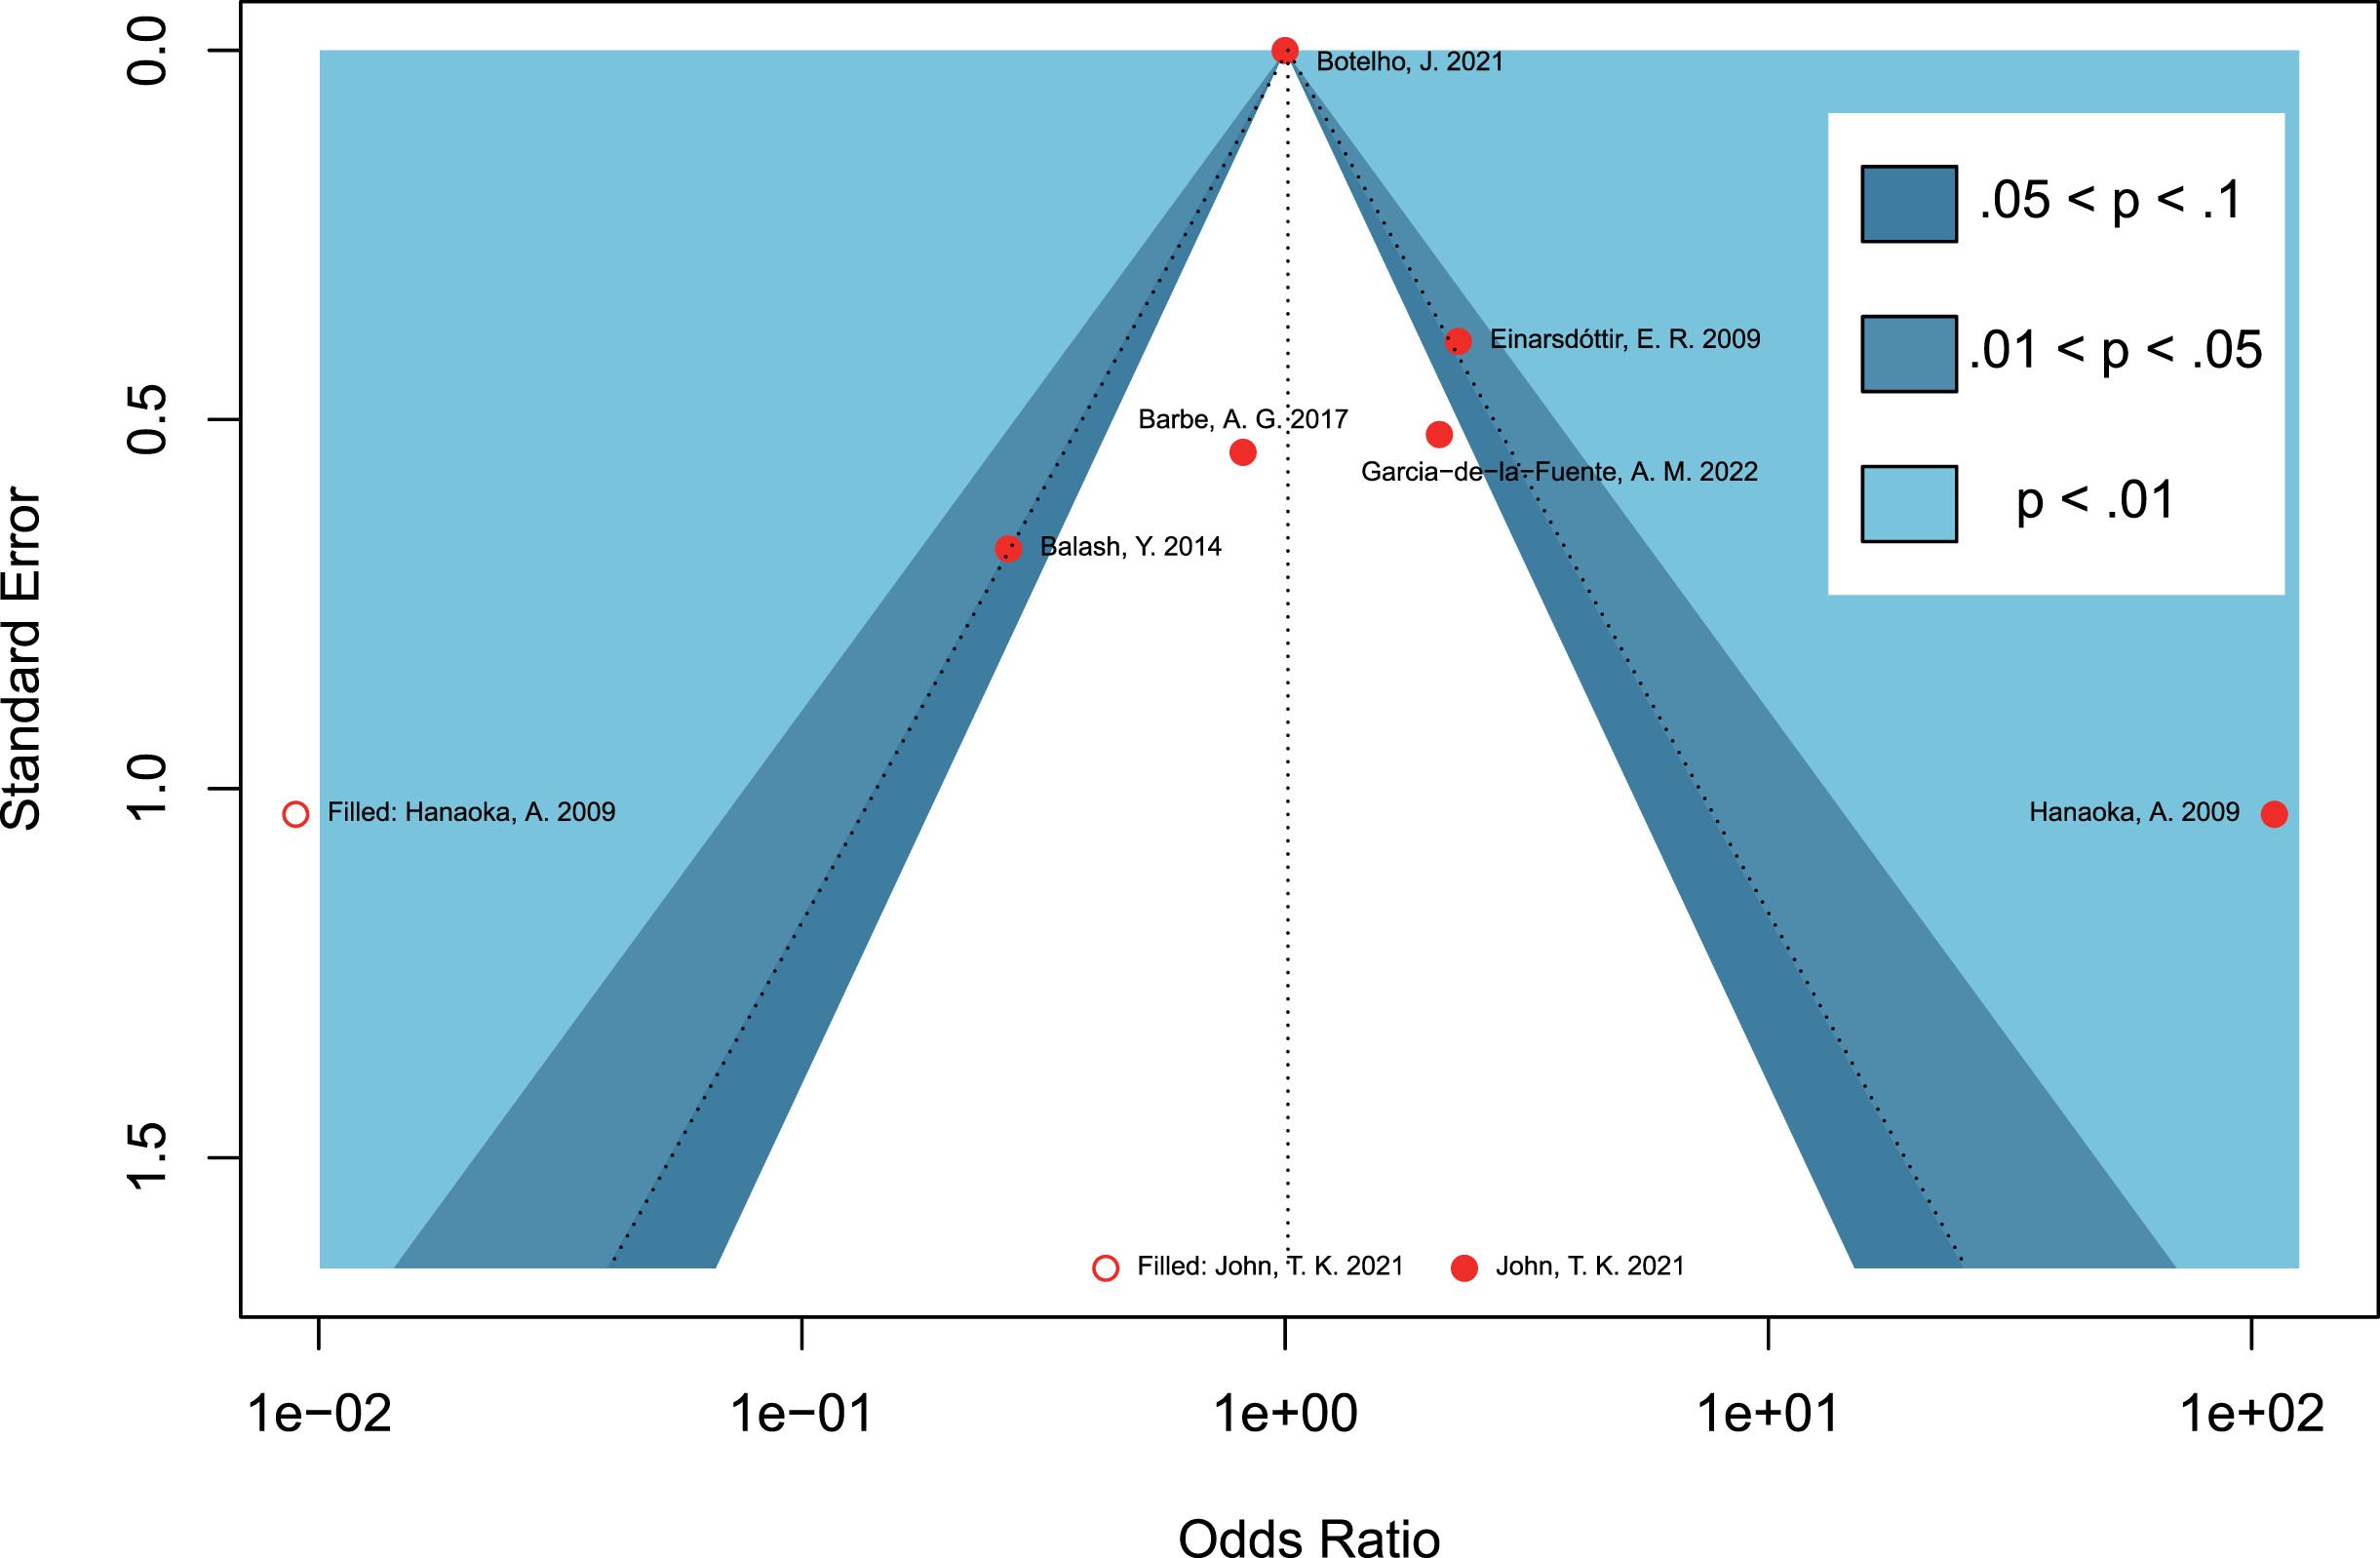 Contour-enhanced funnel plots assessing the potential publication bias on studies concerning periodontitis and the risk of Parkinson’s disease.